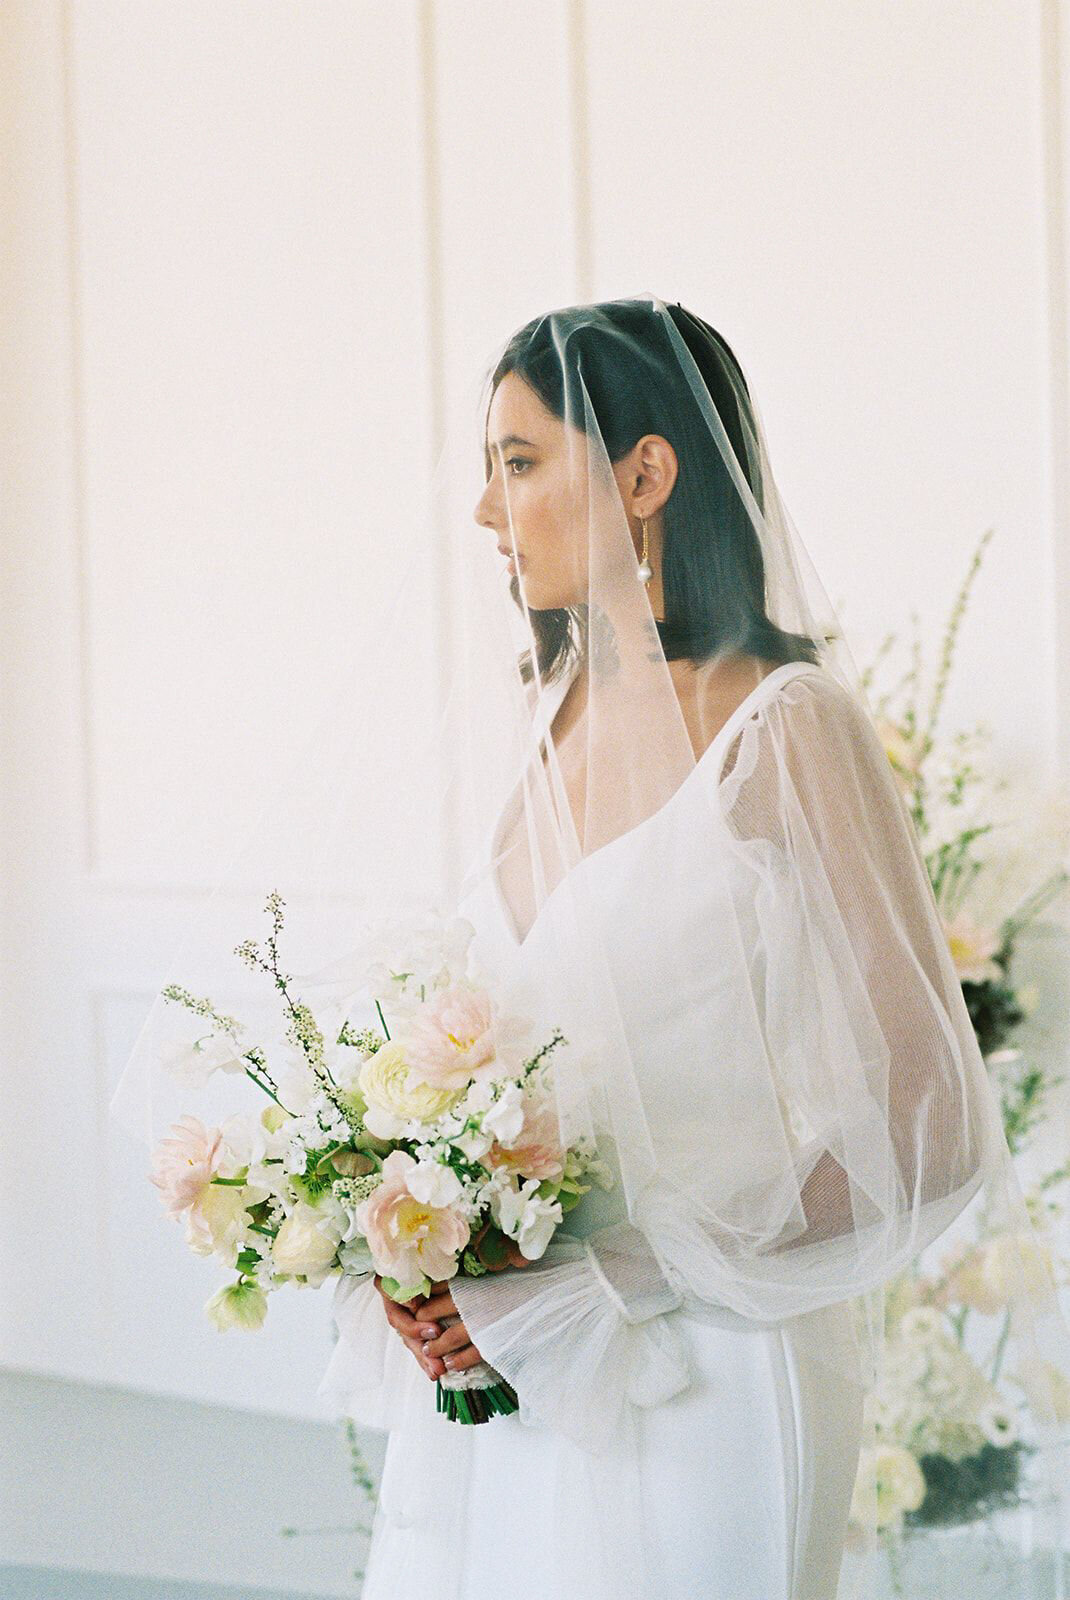 Classic bridal veil by Blair Nadeau Bridal Adornments, romantic and modern wedding jewelry based in Brampton. Featured on the Brontë Bride Vendor Guide.